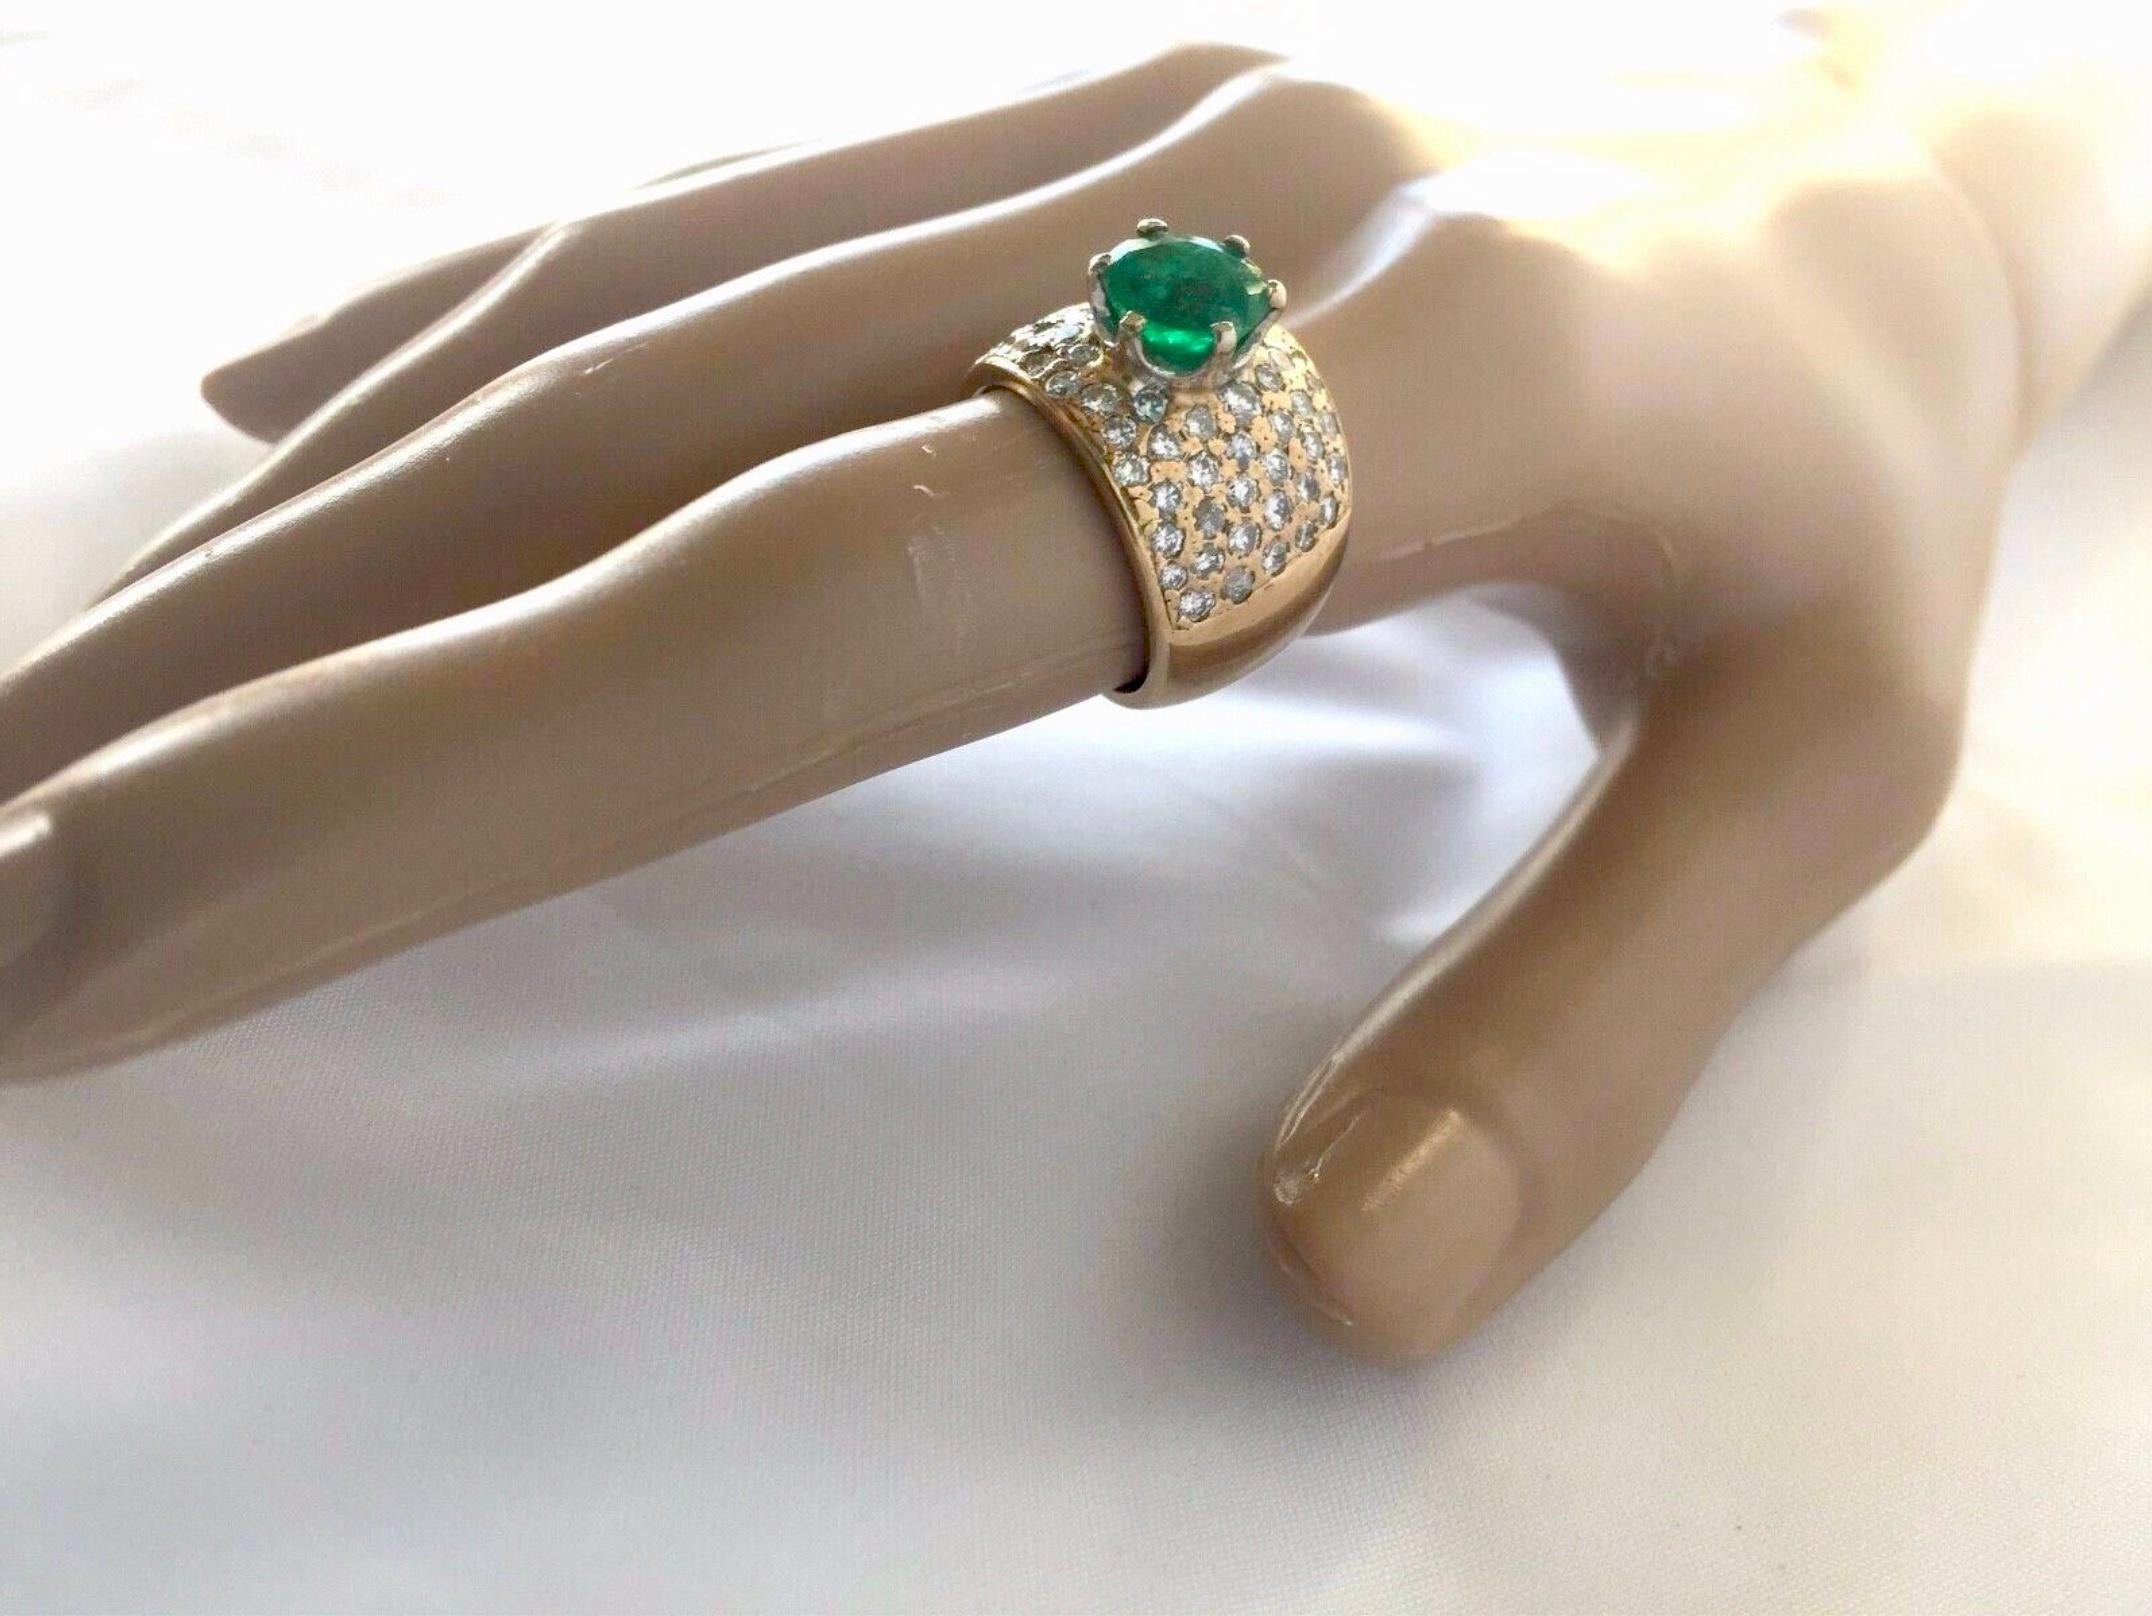 Vintage 4.10 Carat Natural Round Cut Colombian Emerald Diamond Ring For Sale 2